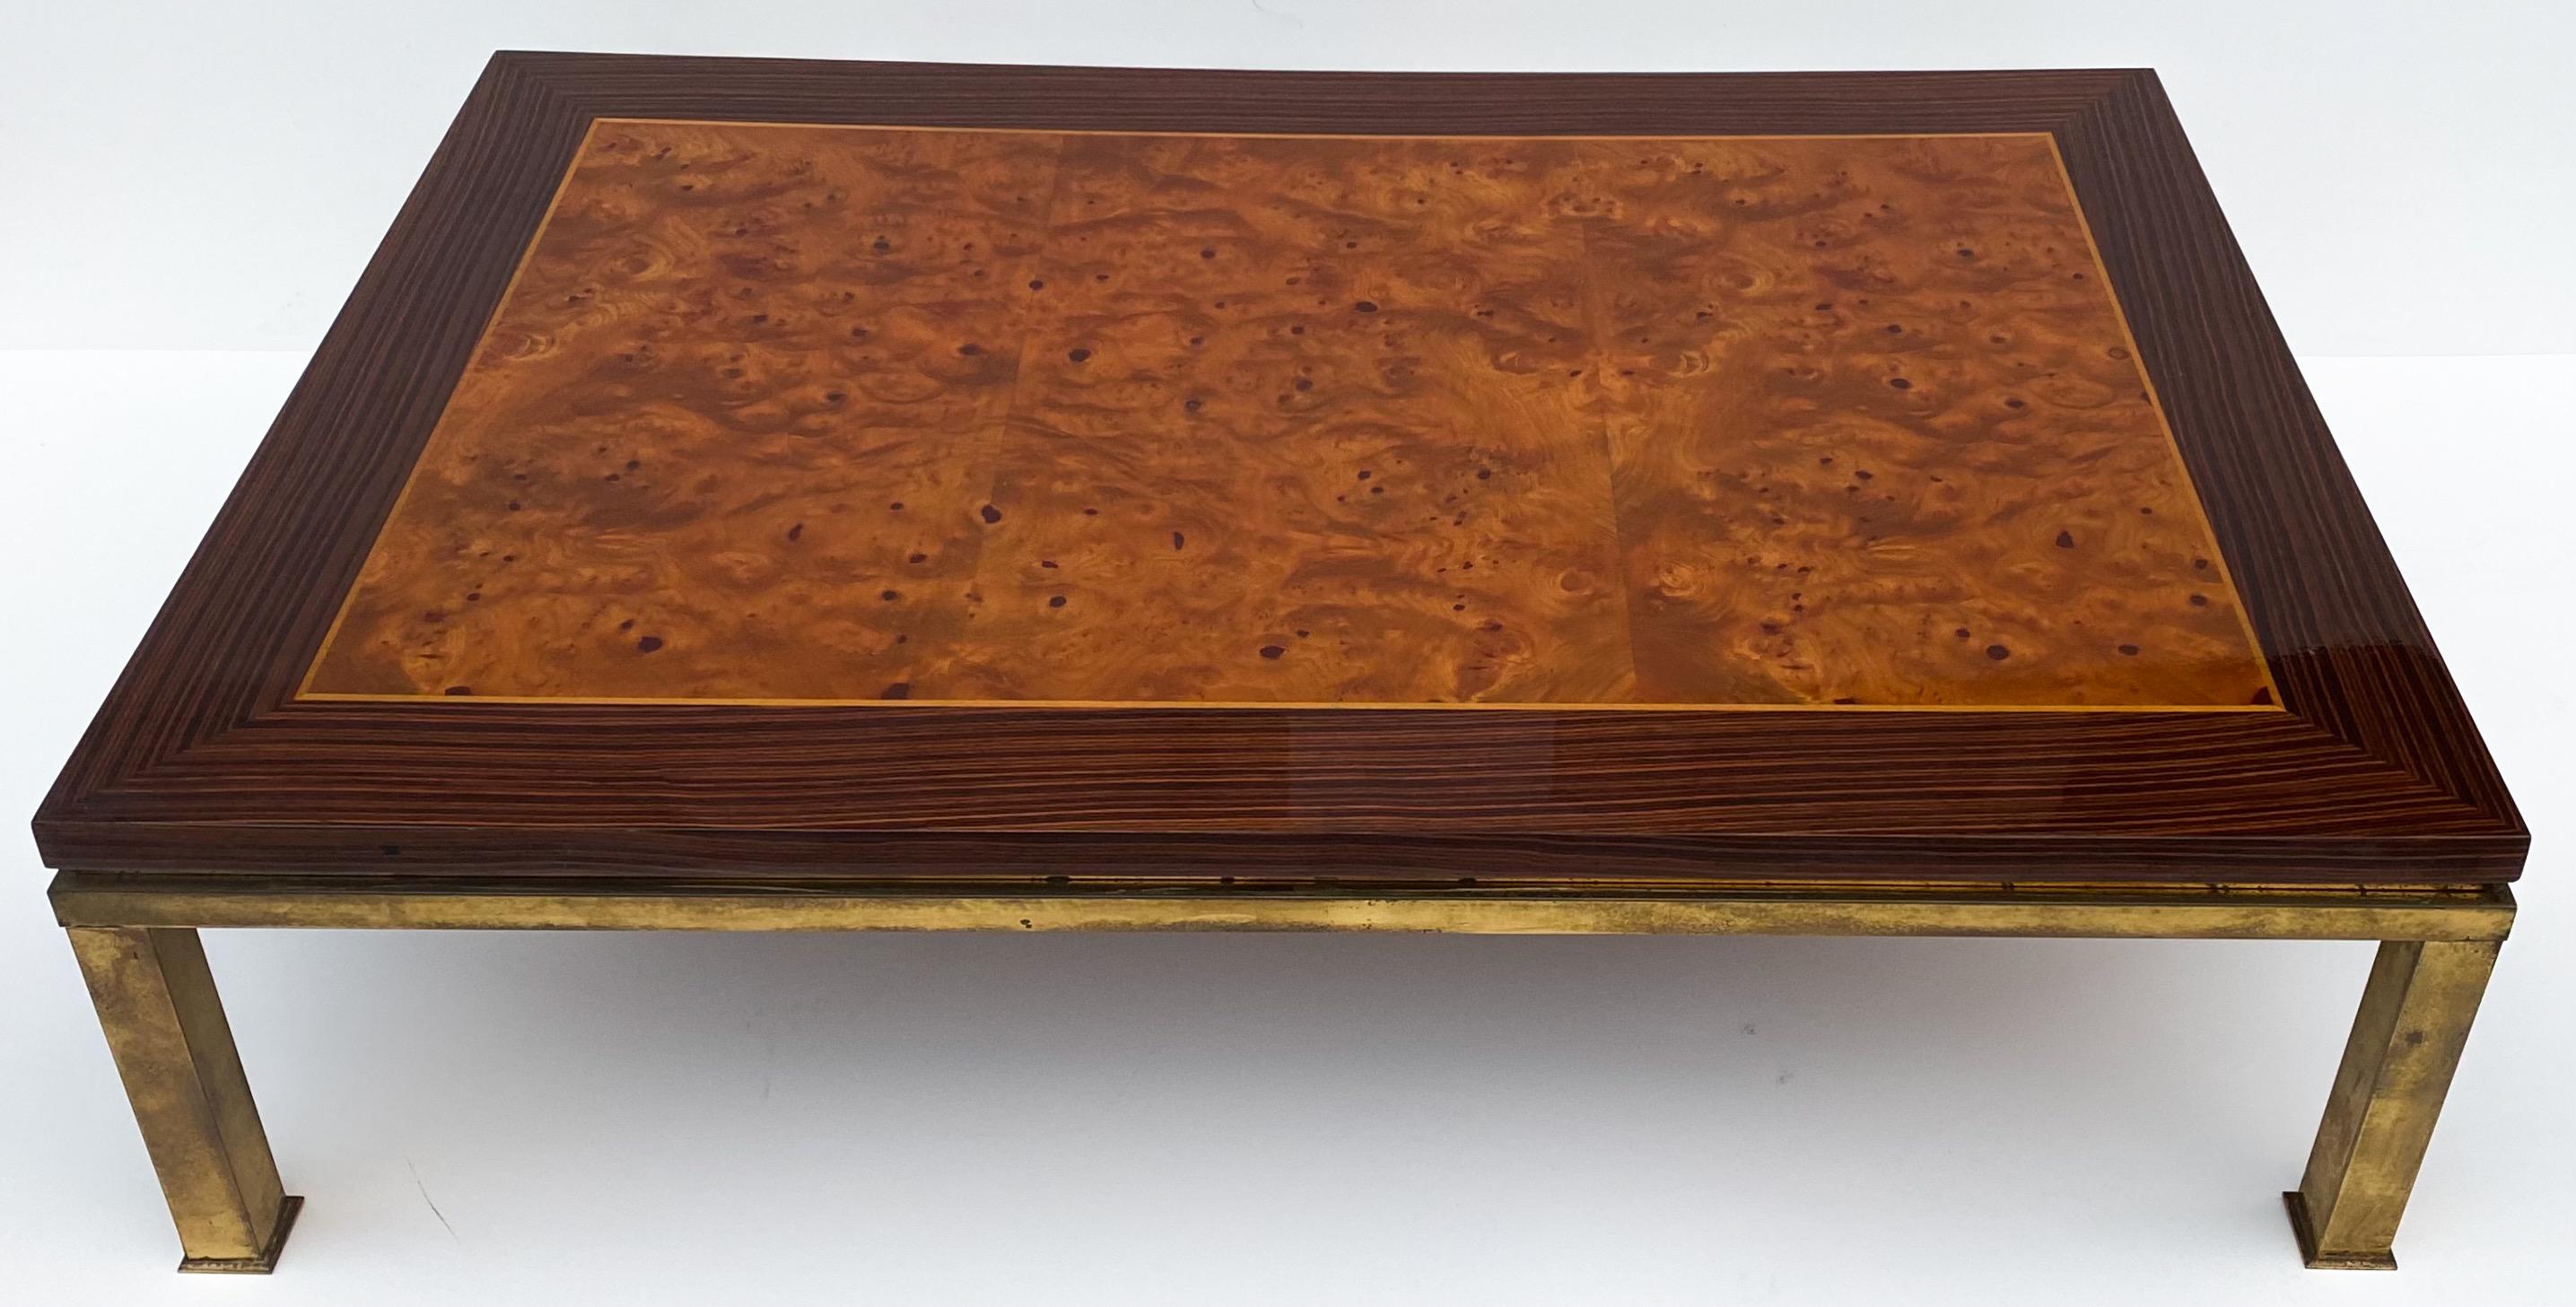 This is a Mid-Century Modern burl wood and brass coffee table with zebra wood banding. The clear coat is a high gloss, and it is in very good condition.